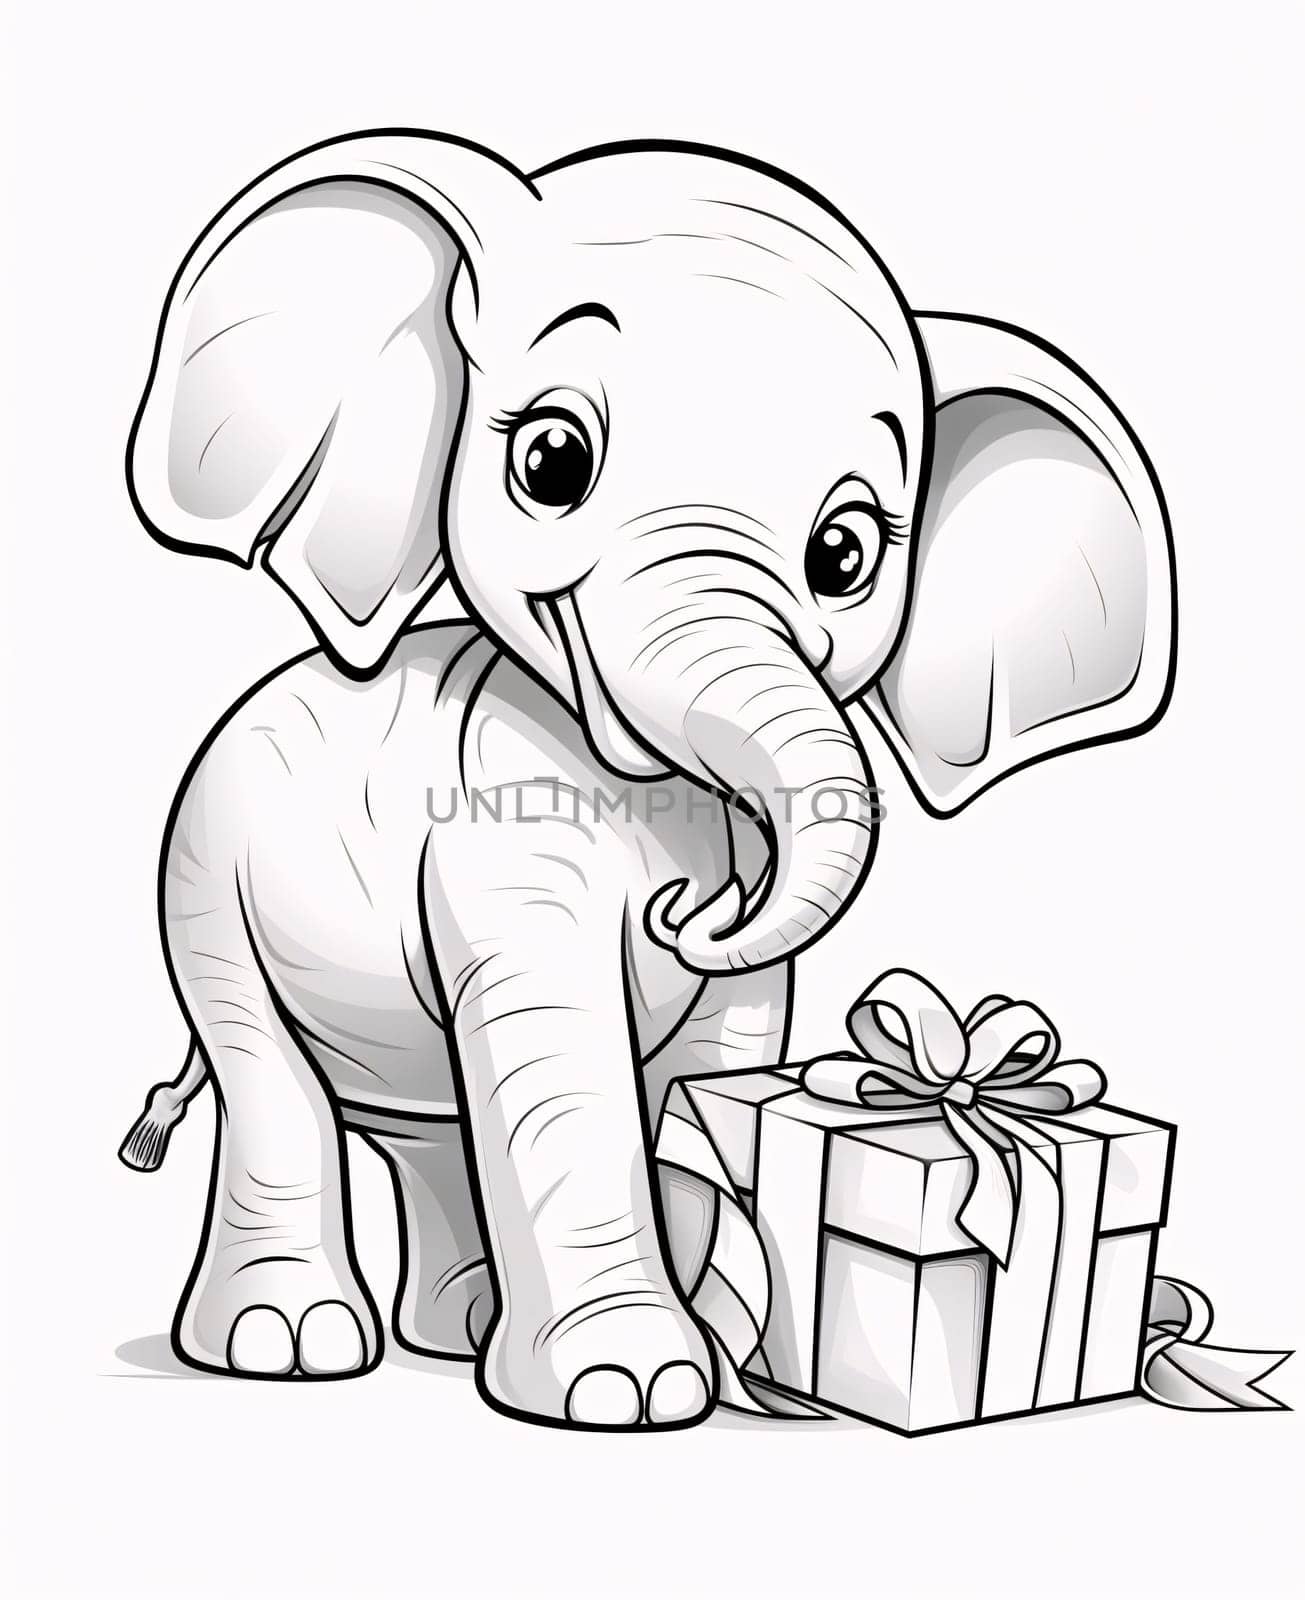 Black and white coloring sheet: Elephant with a gift. Gifts as a day symbol of present and love. by ThemesS